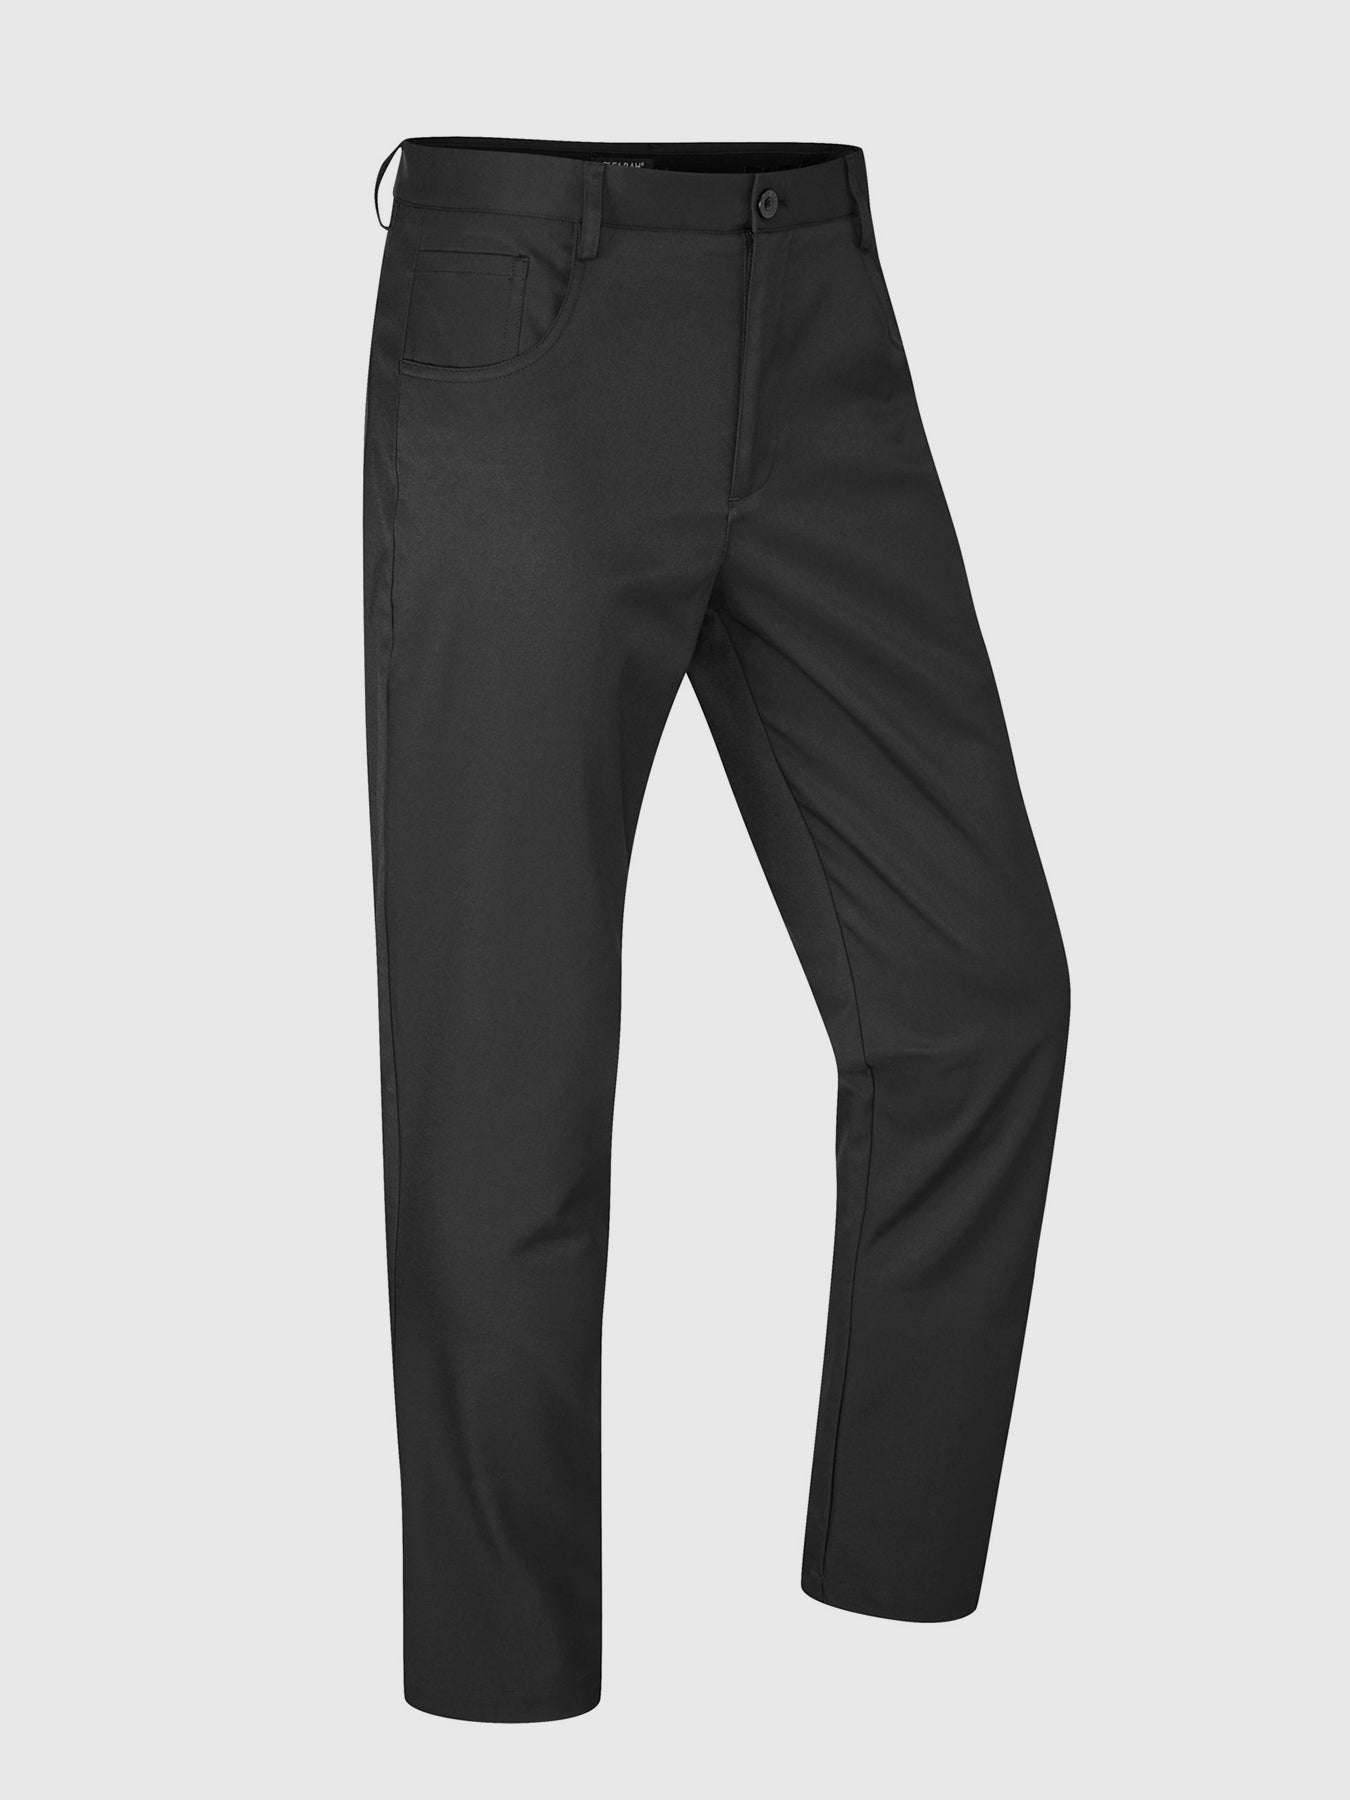 View Judson Performance Golf Trousers In Black information